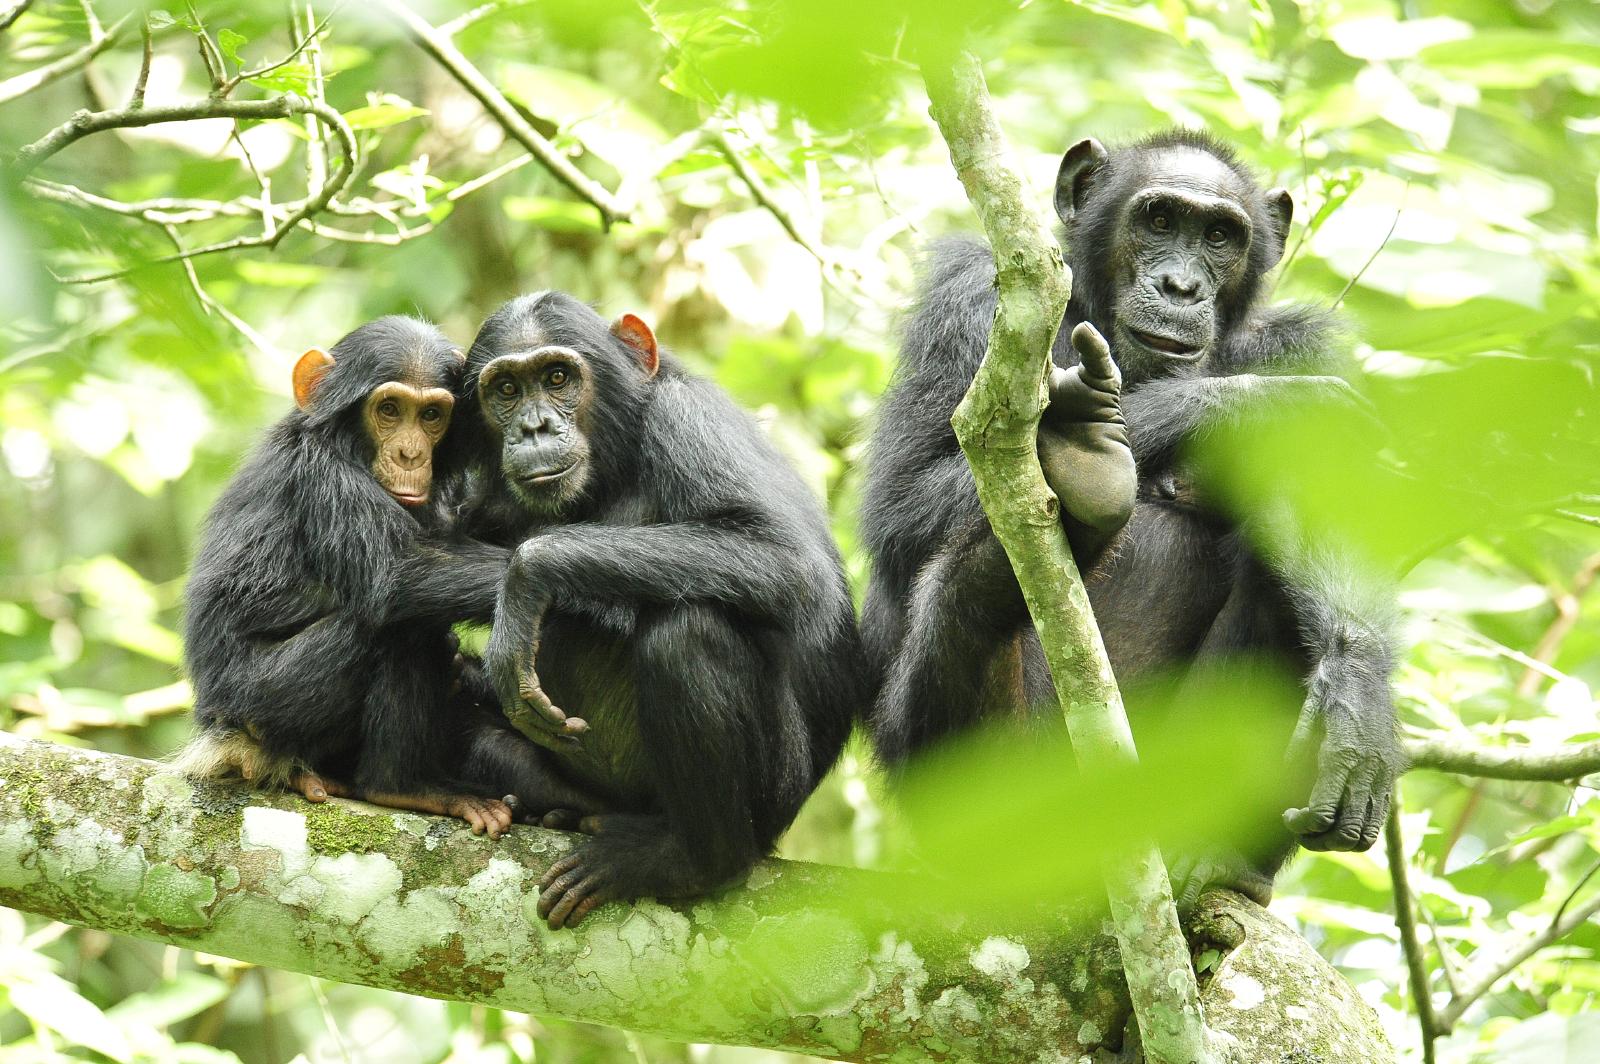 Female chimpanzee with offspring in a tree.